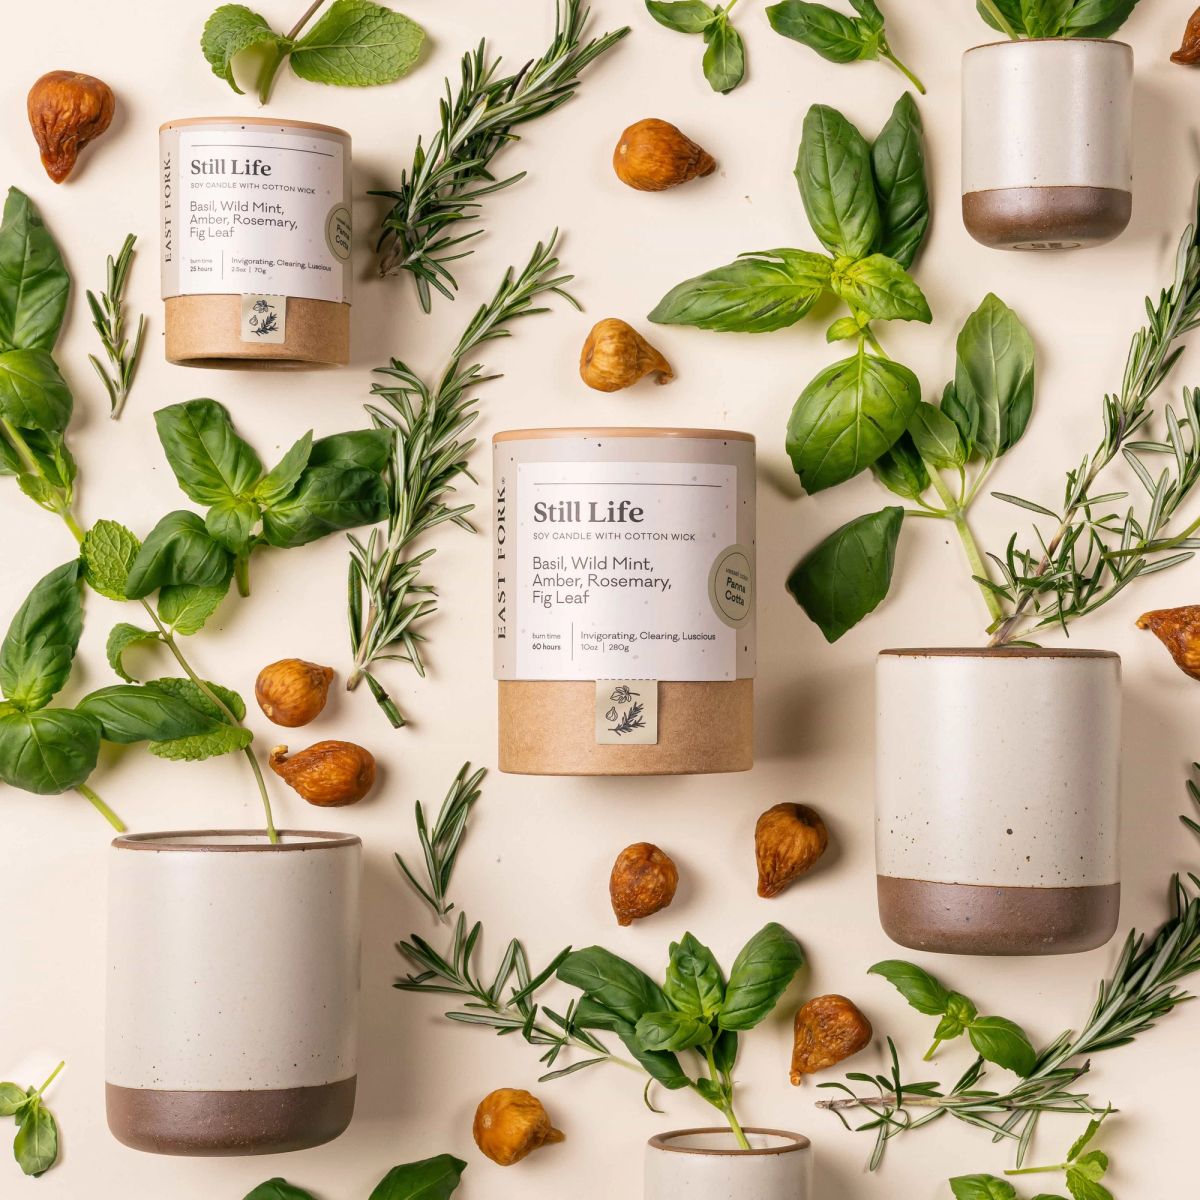 An artful layout of The Candle in Still Life - centered is a cardboard packaging tube with the candle's name, surrounded by small and large ceramic candles in a cylindrical vessel in a off-white color, surrounded by basil, rosemary, and fig leaf.